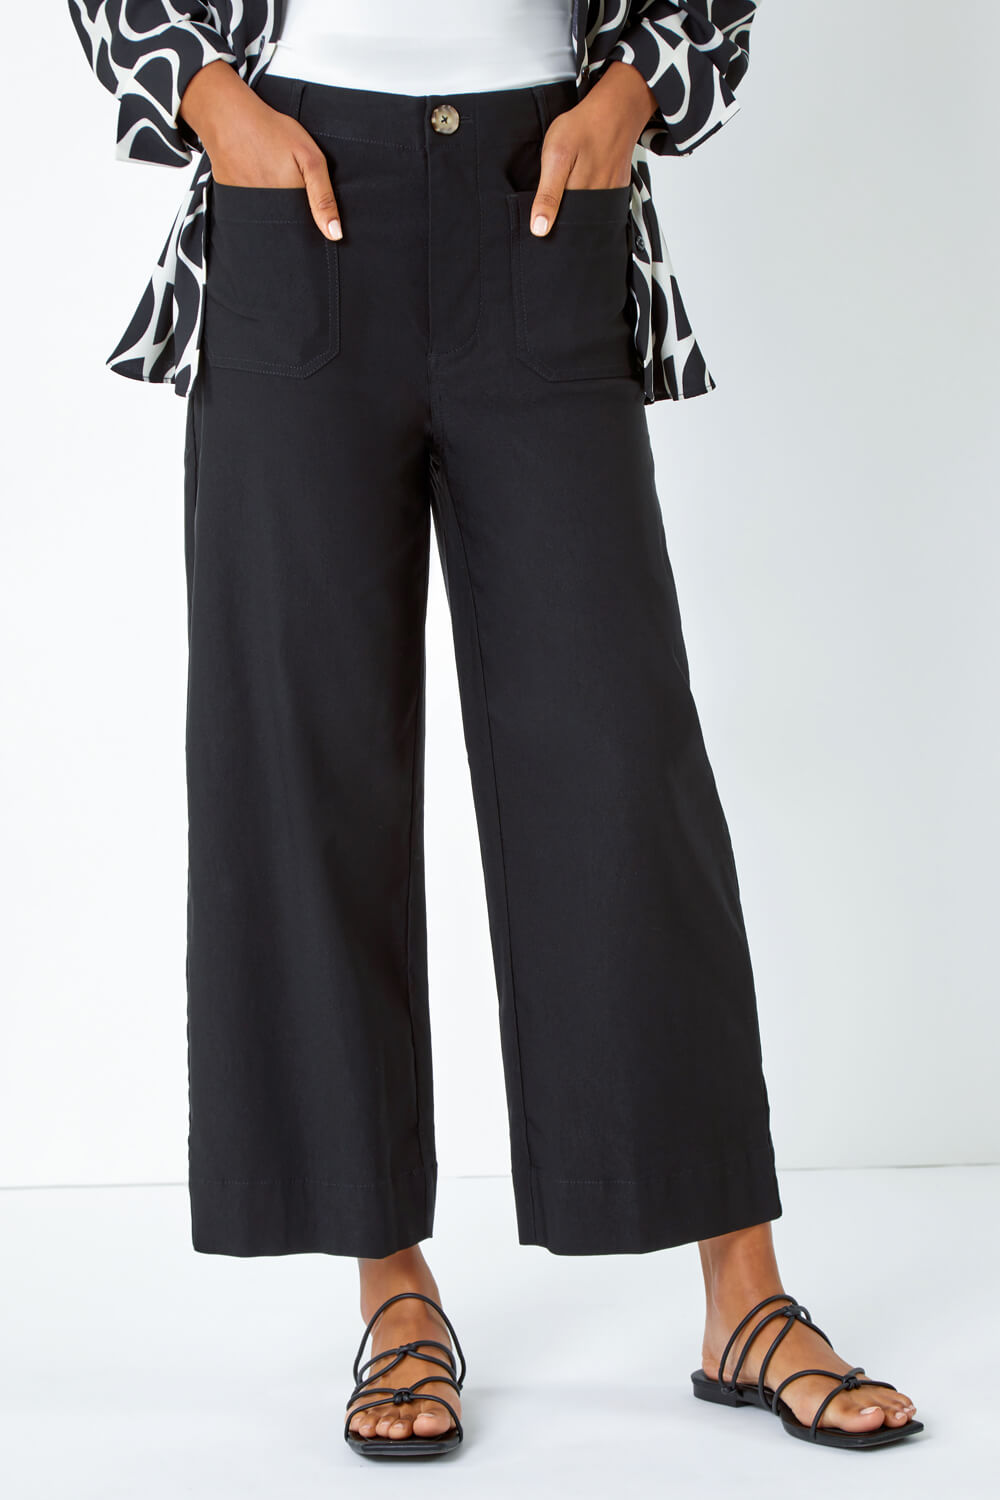 Black Pocket Detail Cropped Stretch Culottes, Image 4 of 5